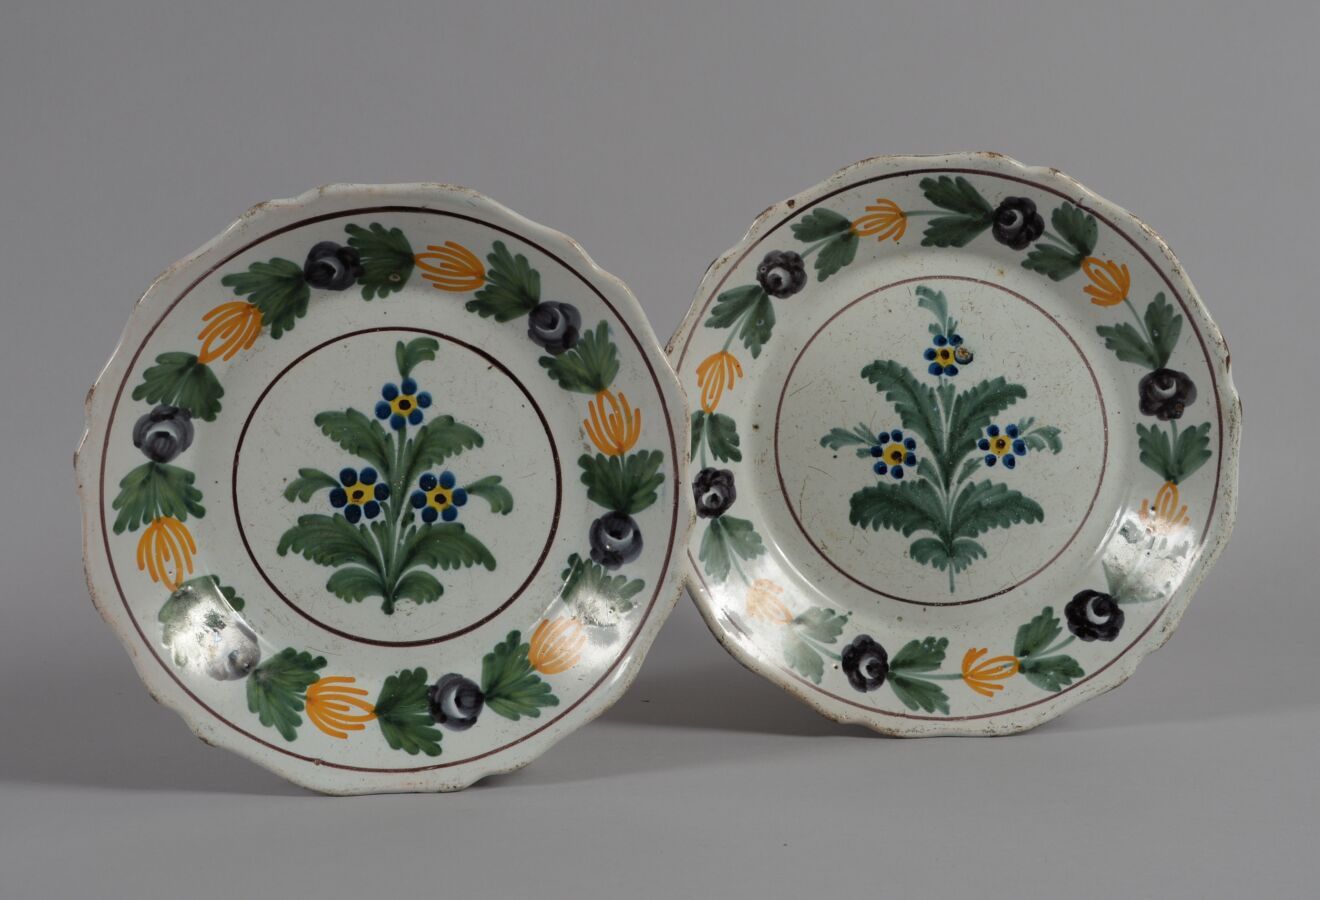 Null NEVERS
Pair of plates with contours in polychrome earthenware with floral d&hellip;